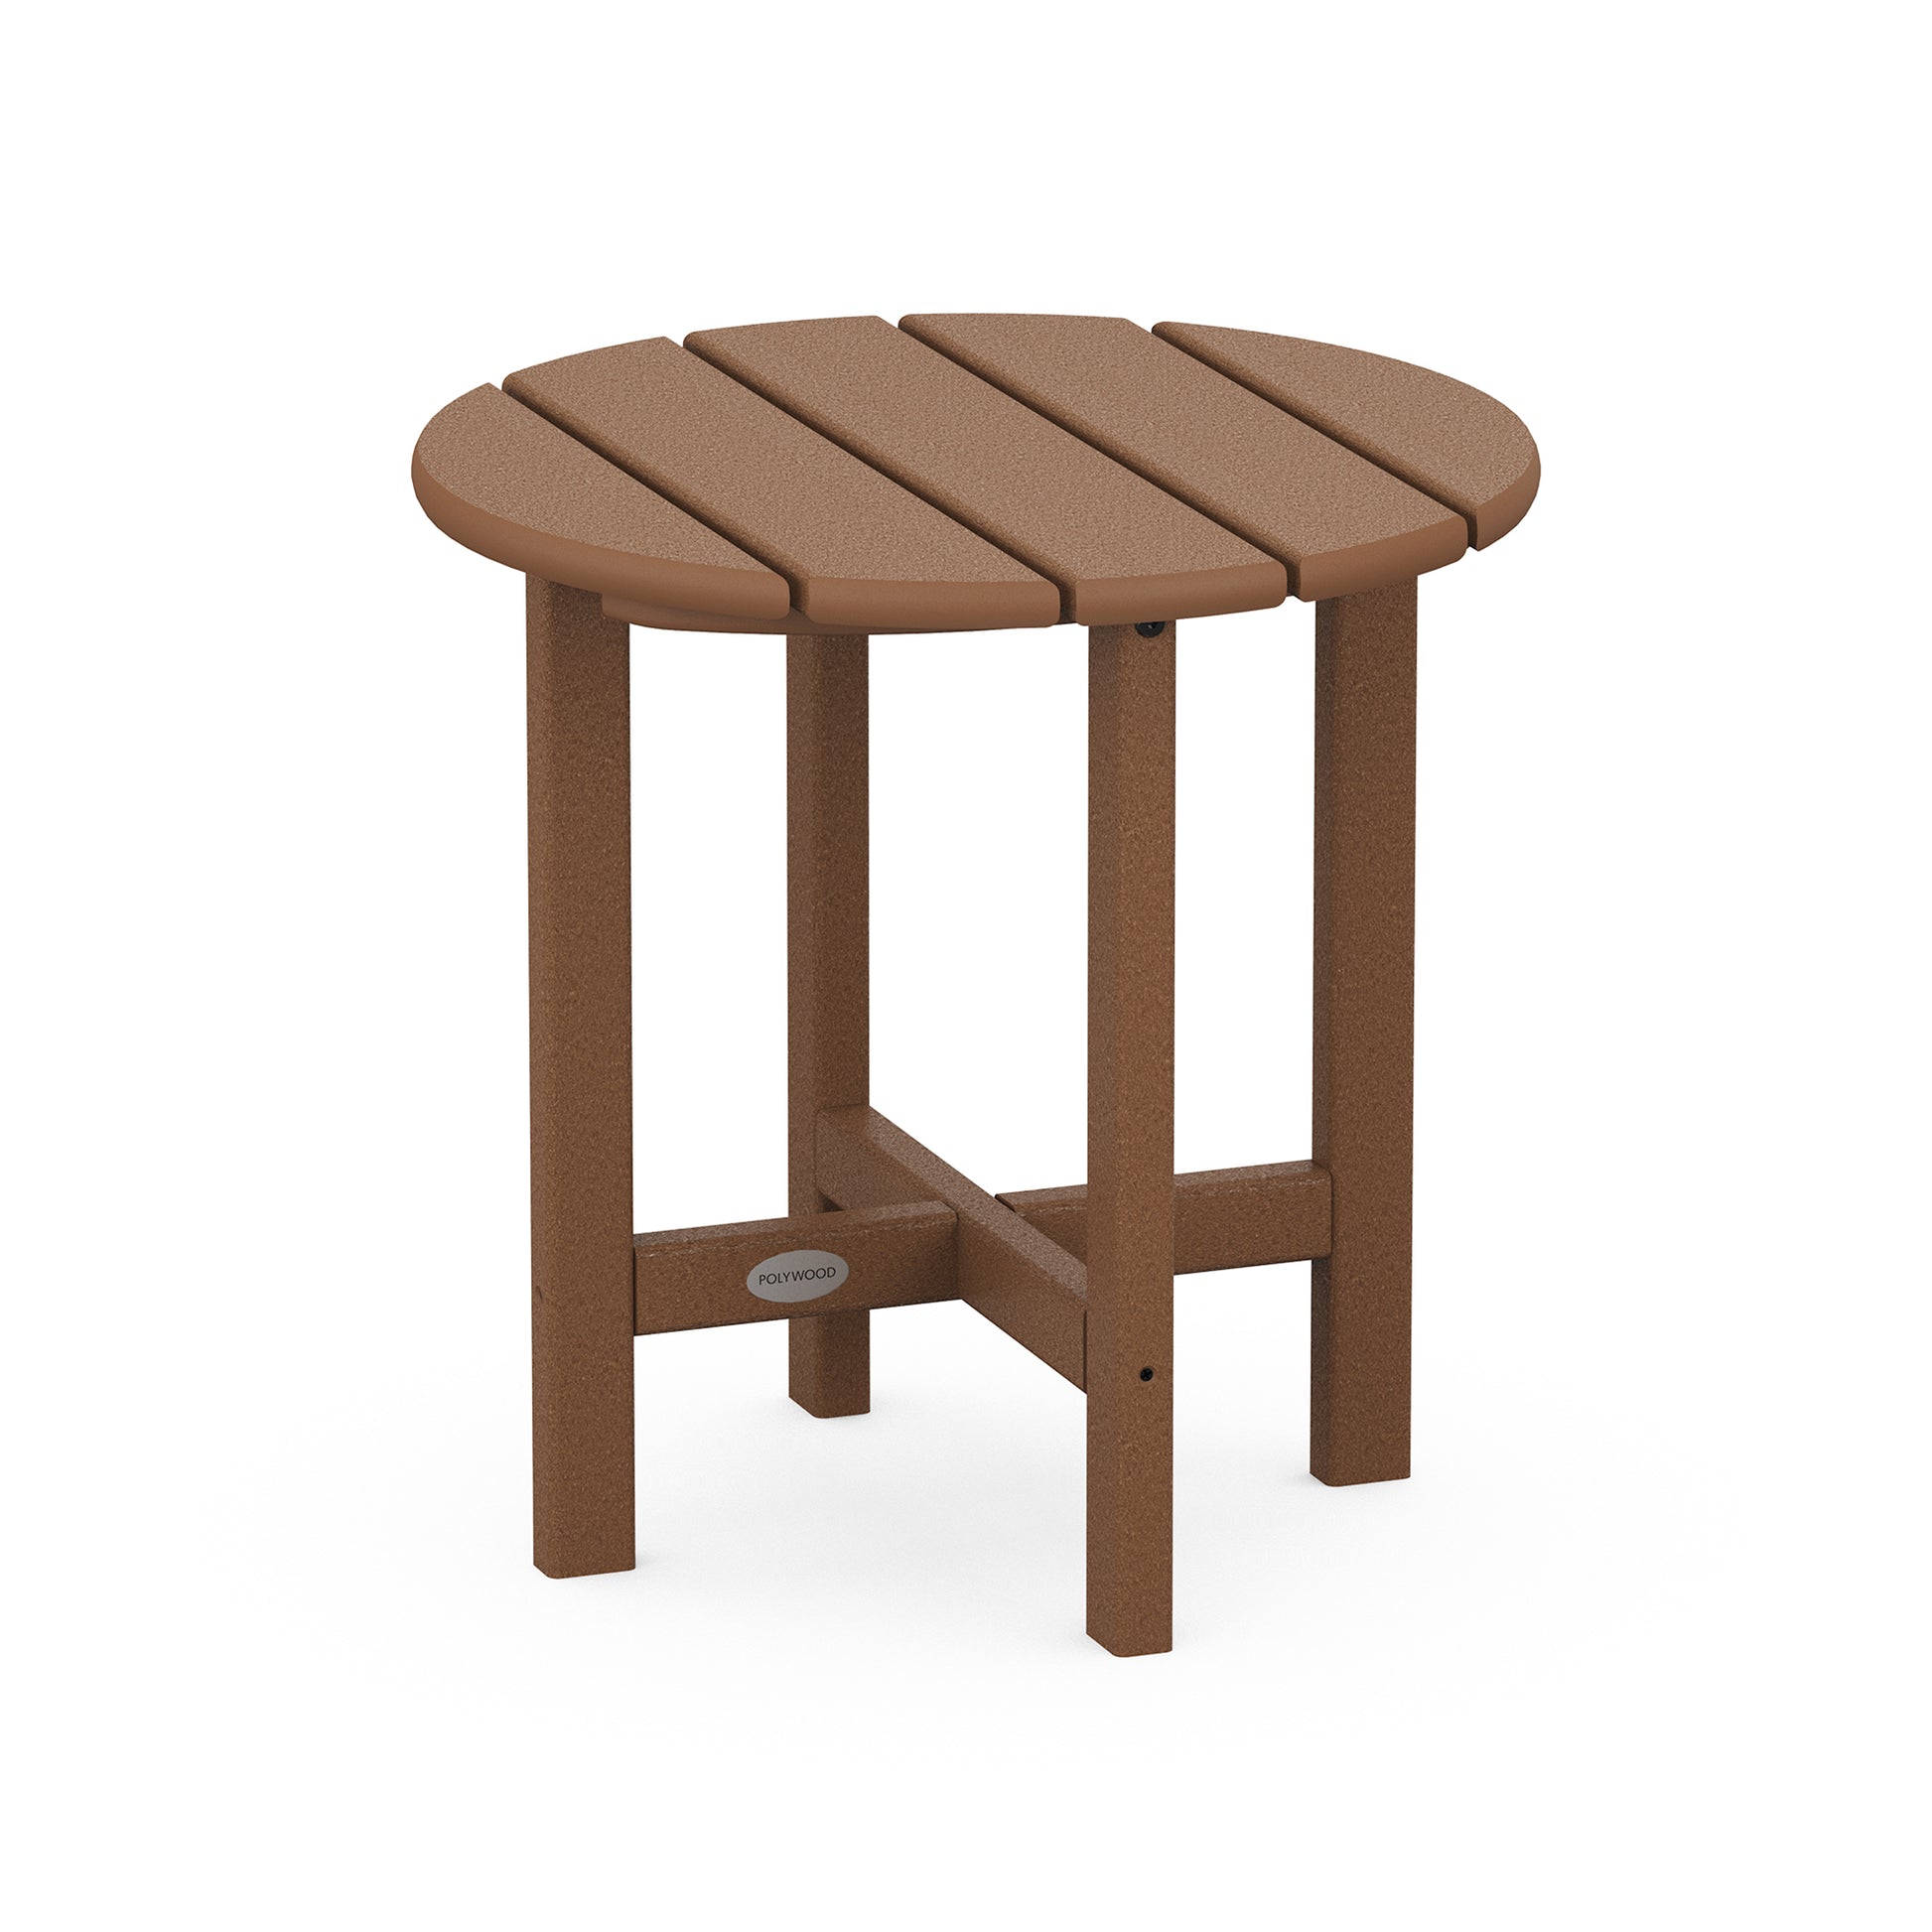 A small, round, brown POLYWOOD® 18" Round Side Table made of plastic slats with four sturdy legs, isolated on a white background.